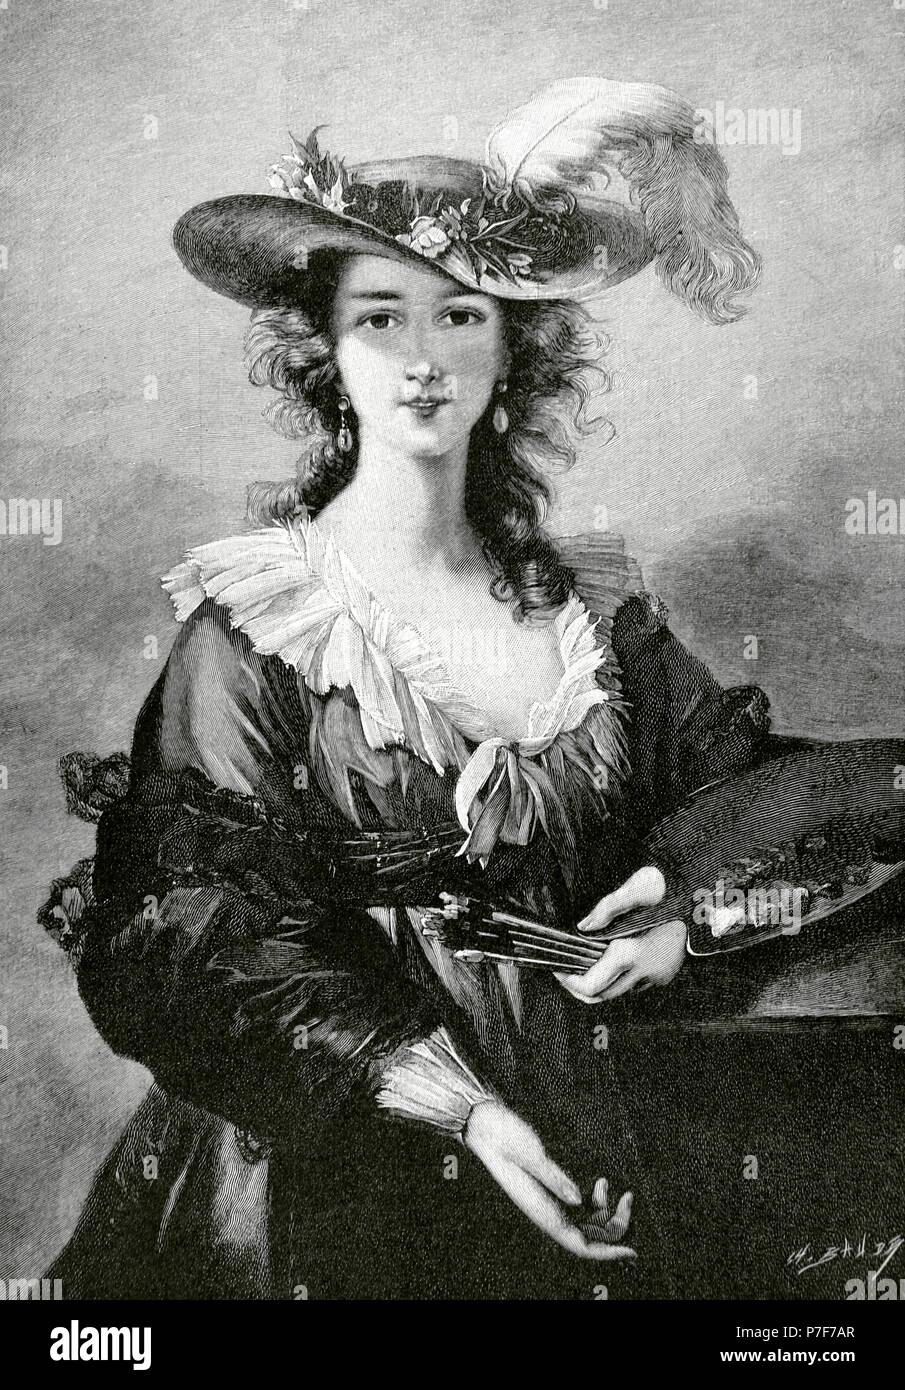 Elisabeth Louise Vigee Le Brun (1755-1842), known as Madame Lebrun. French painter. Rococo style and Neoclassicist. Self-portrait. Engraving by Ch. Baude. "La Ilustracion Artistica", 1896.. Stock Photo